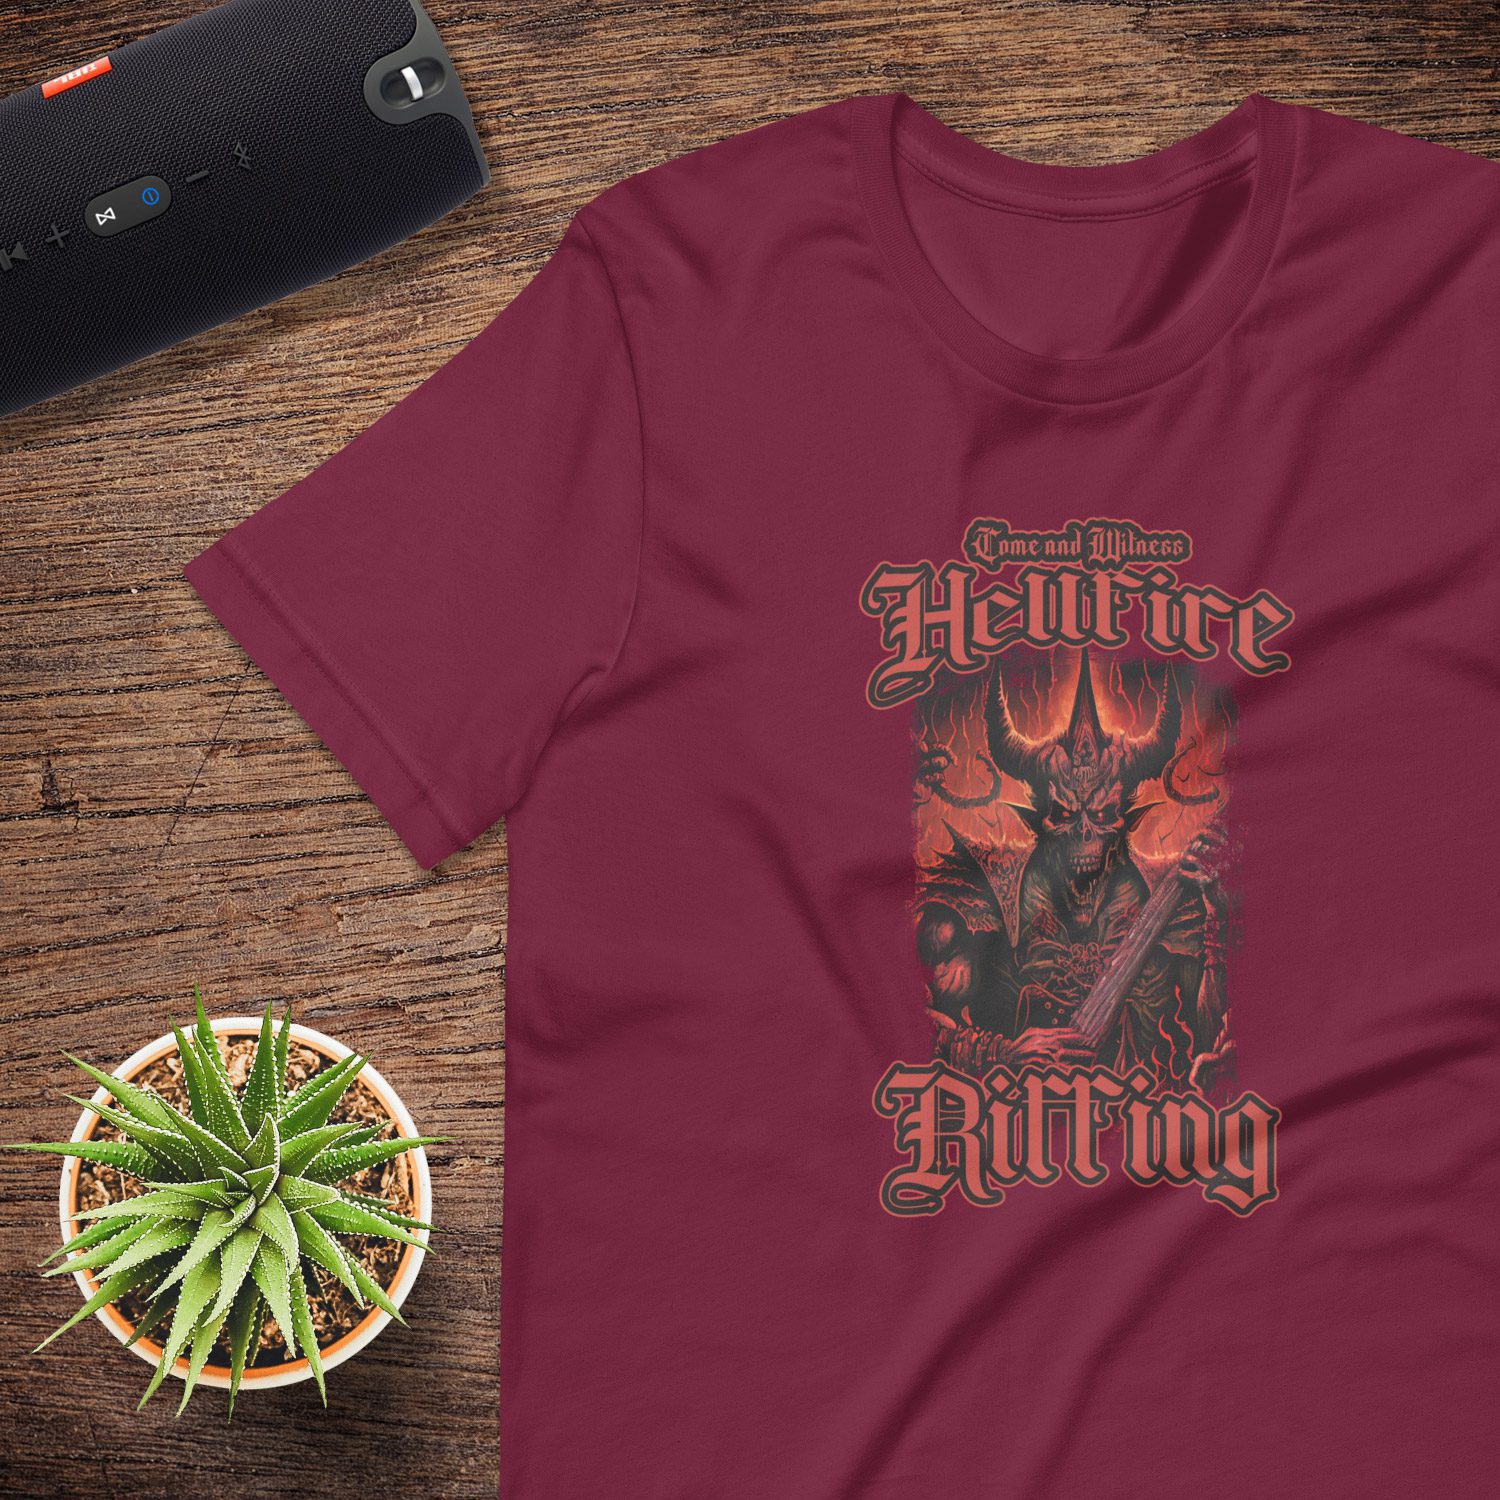 Unisex t-shirt 'Come and Witness Hellfire Riffing'